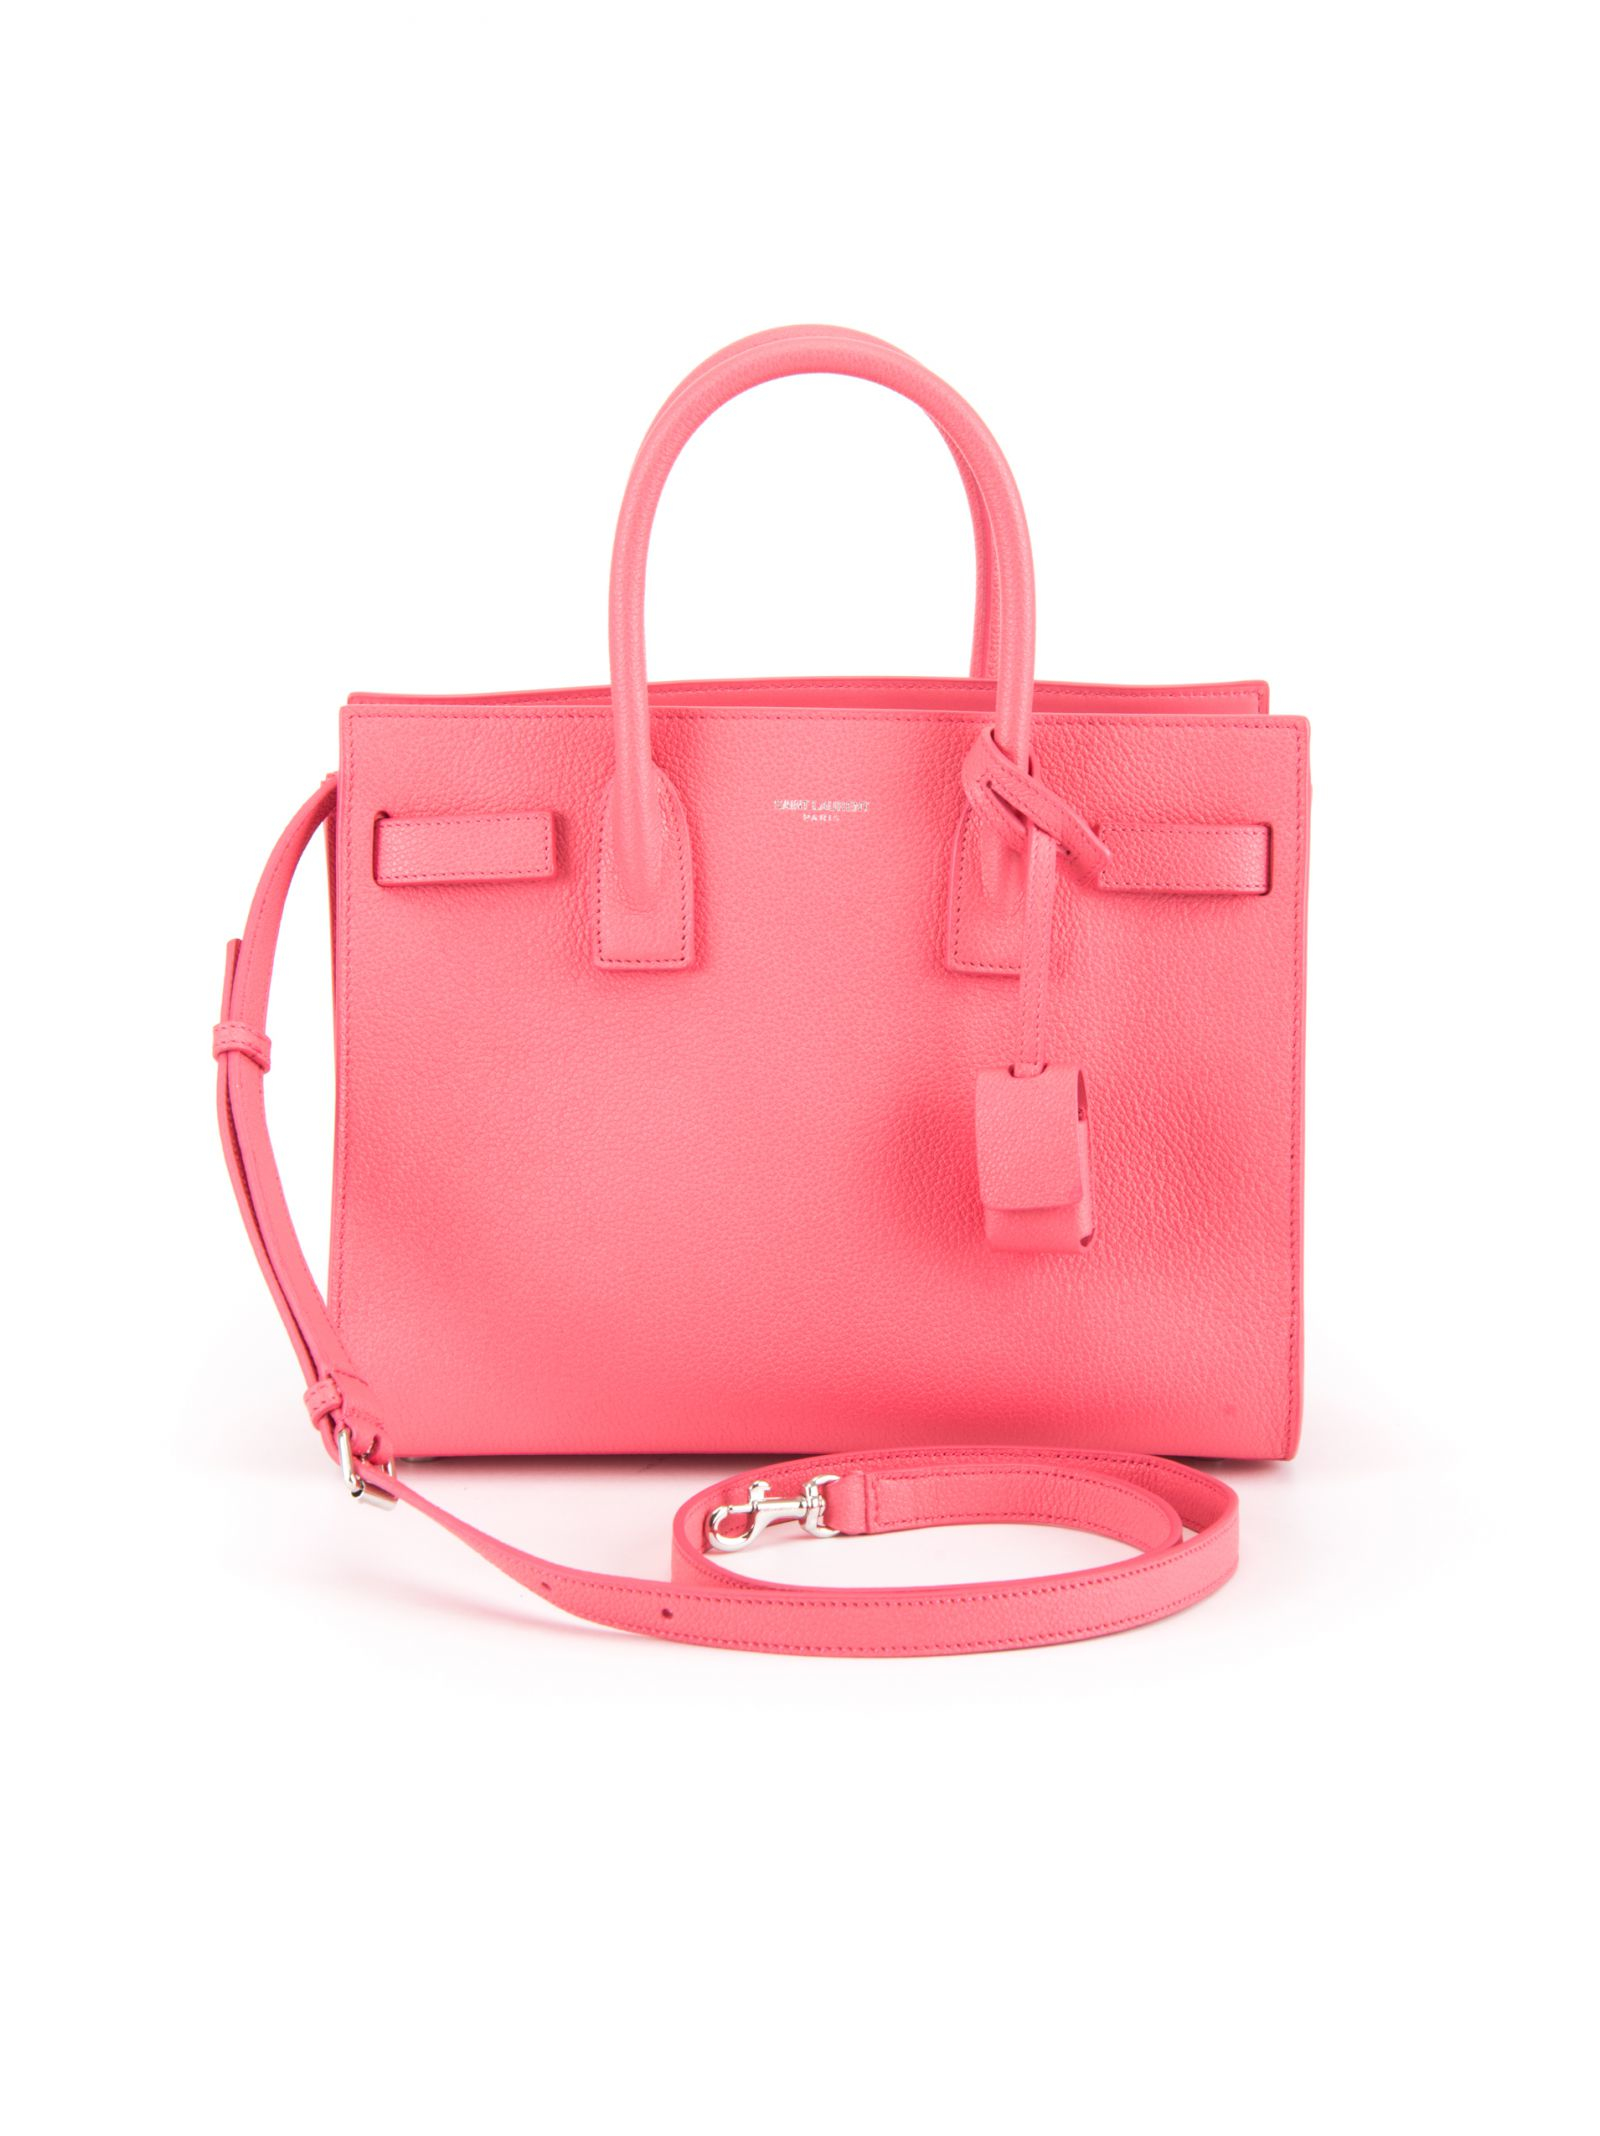 Saint laurent Ysl Baby Sac De Jour Bag With Strap in Red (ROSE ...  